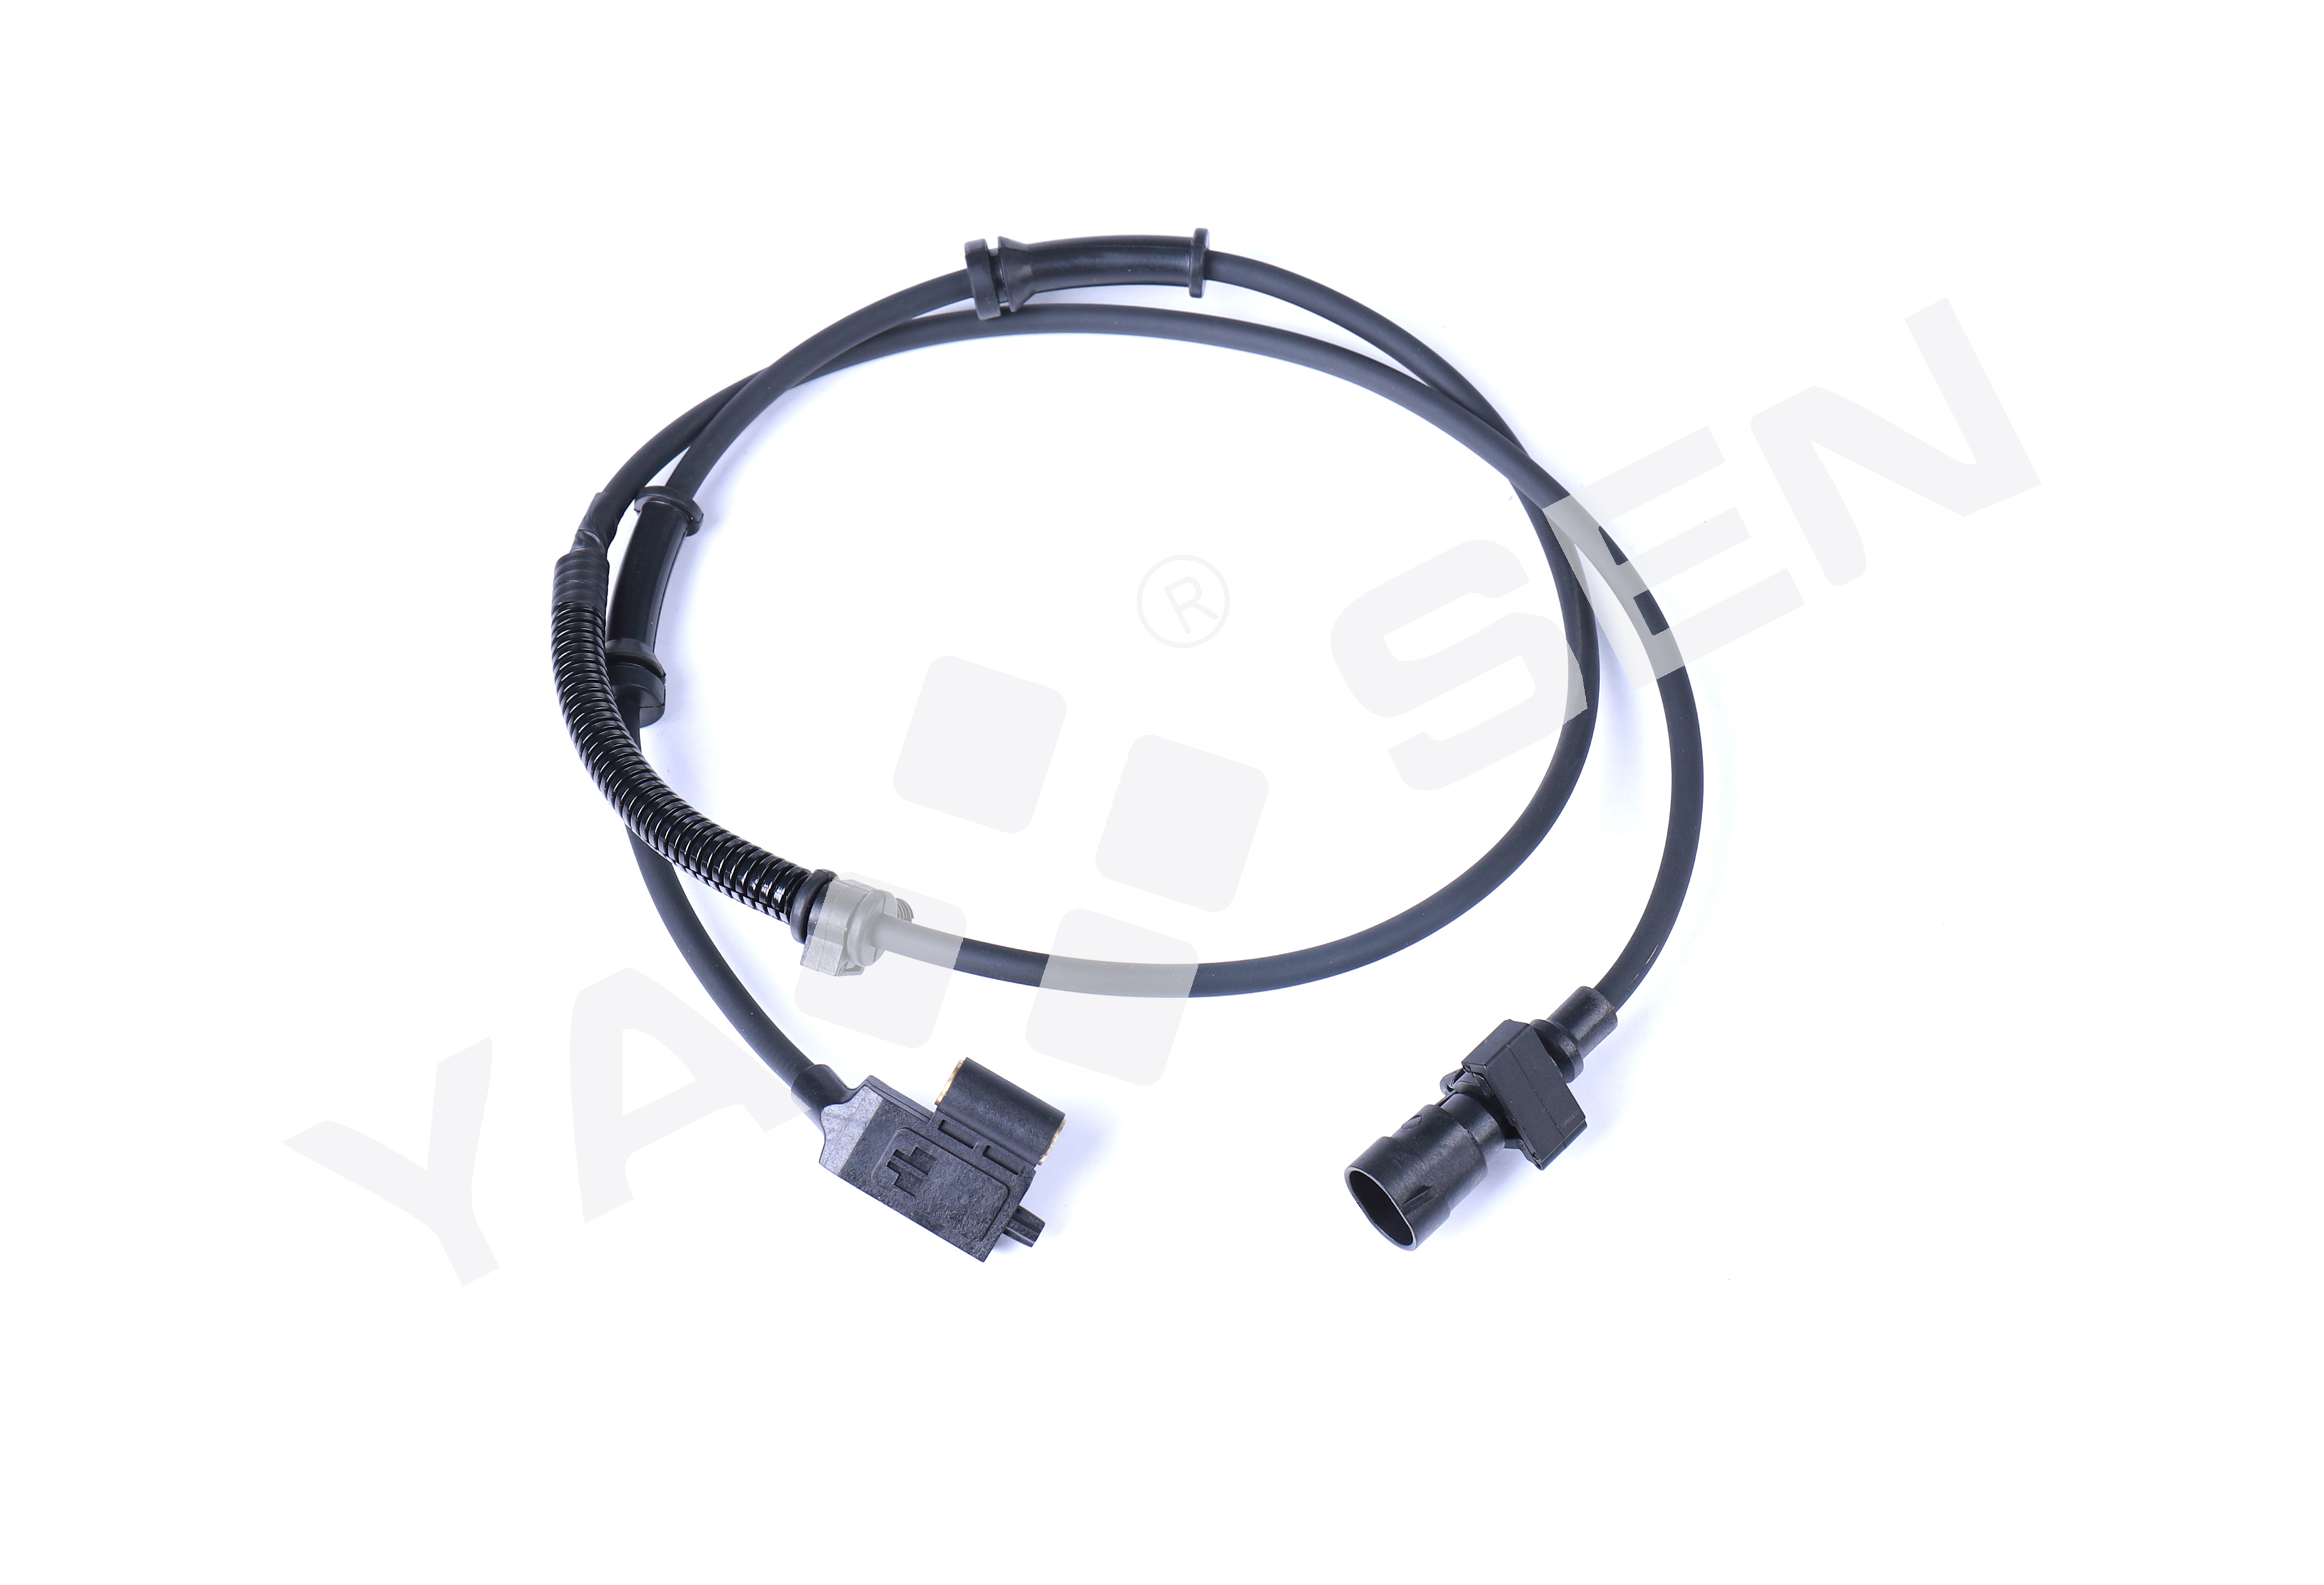 ABS Wheel Speed Sensor for JEEP 56041316AA 56041316AB 56041316AC DS56041316AB SU6889 5S4977 ALS50 970073